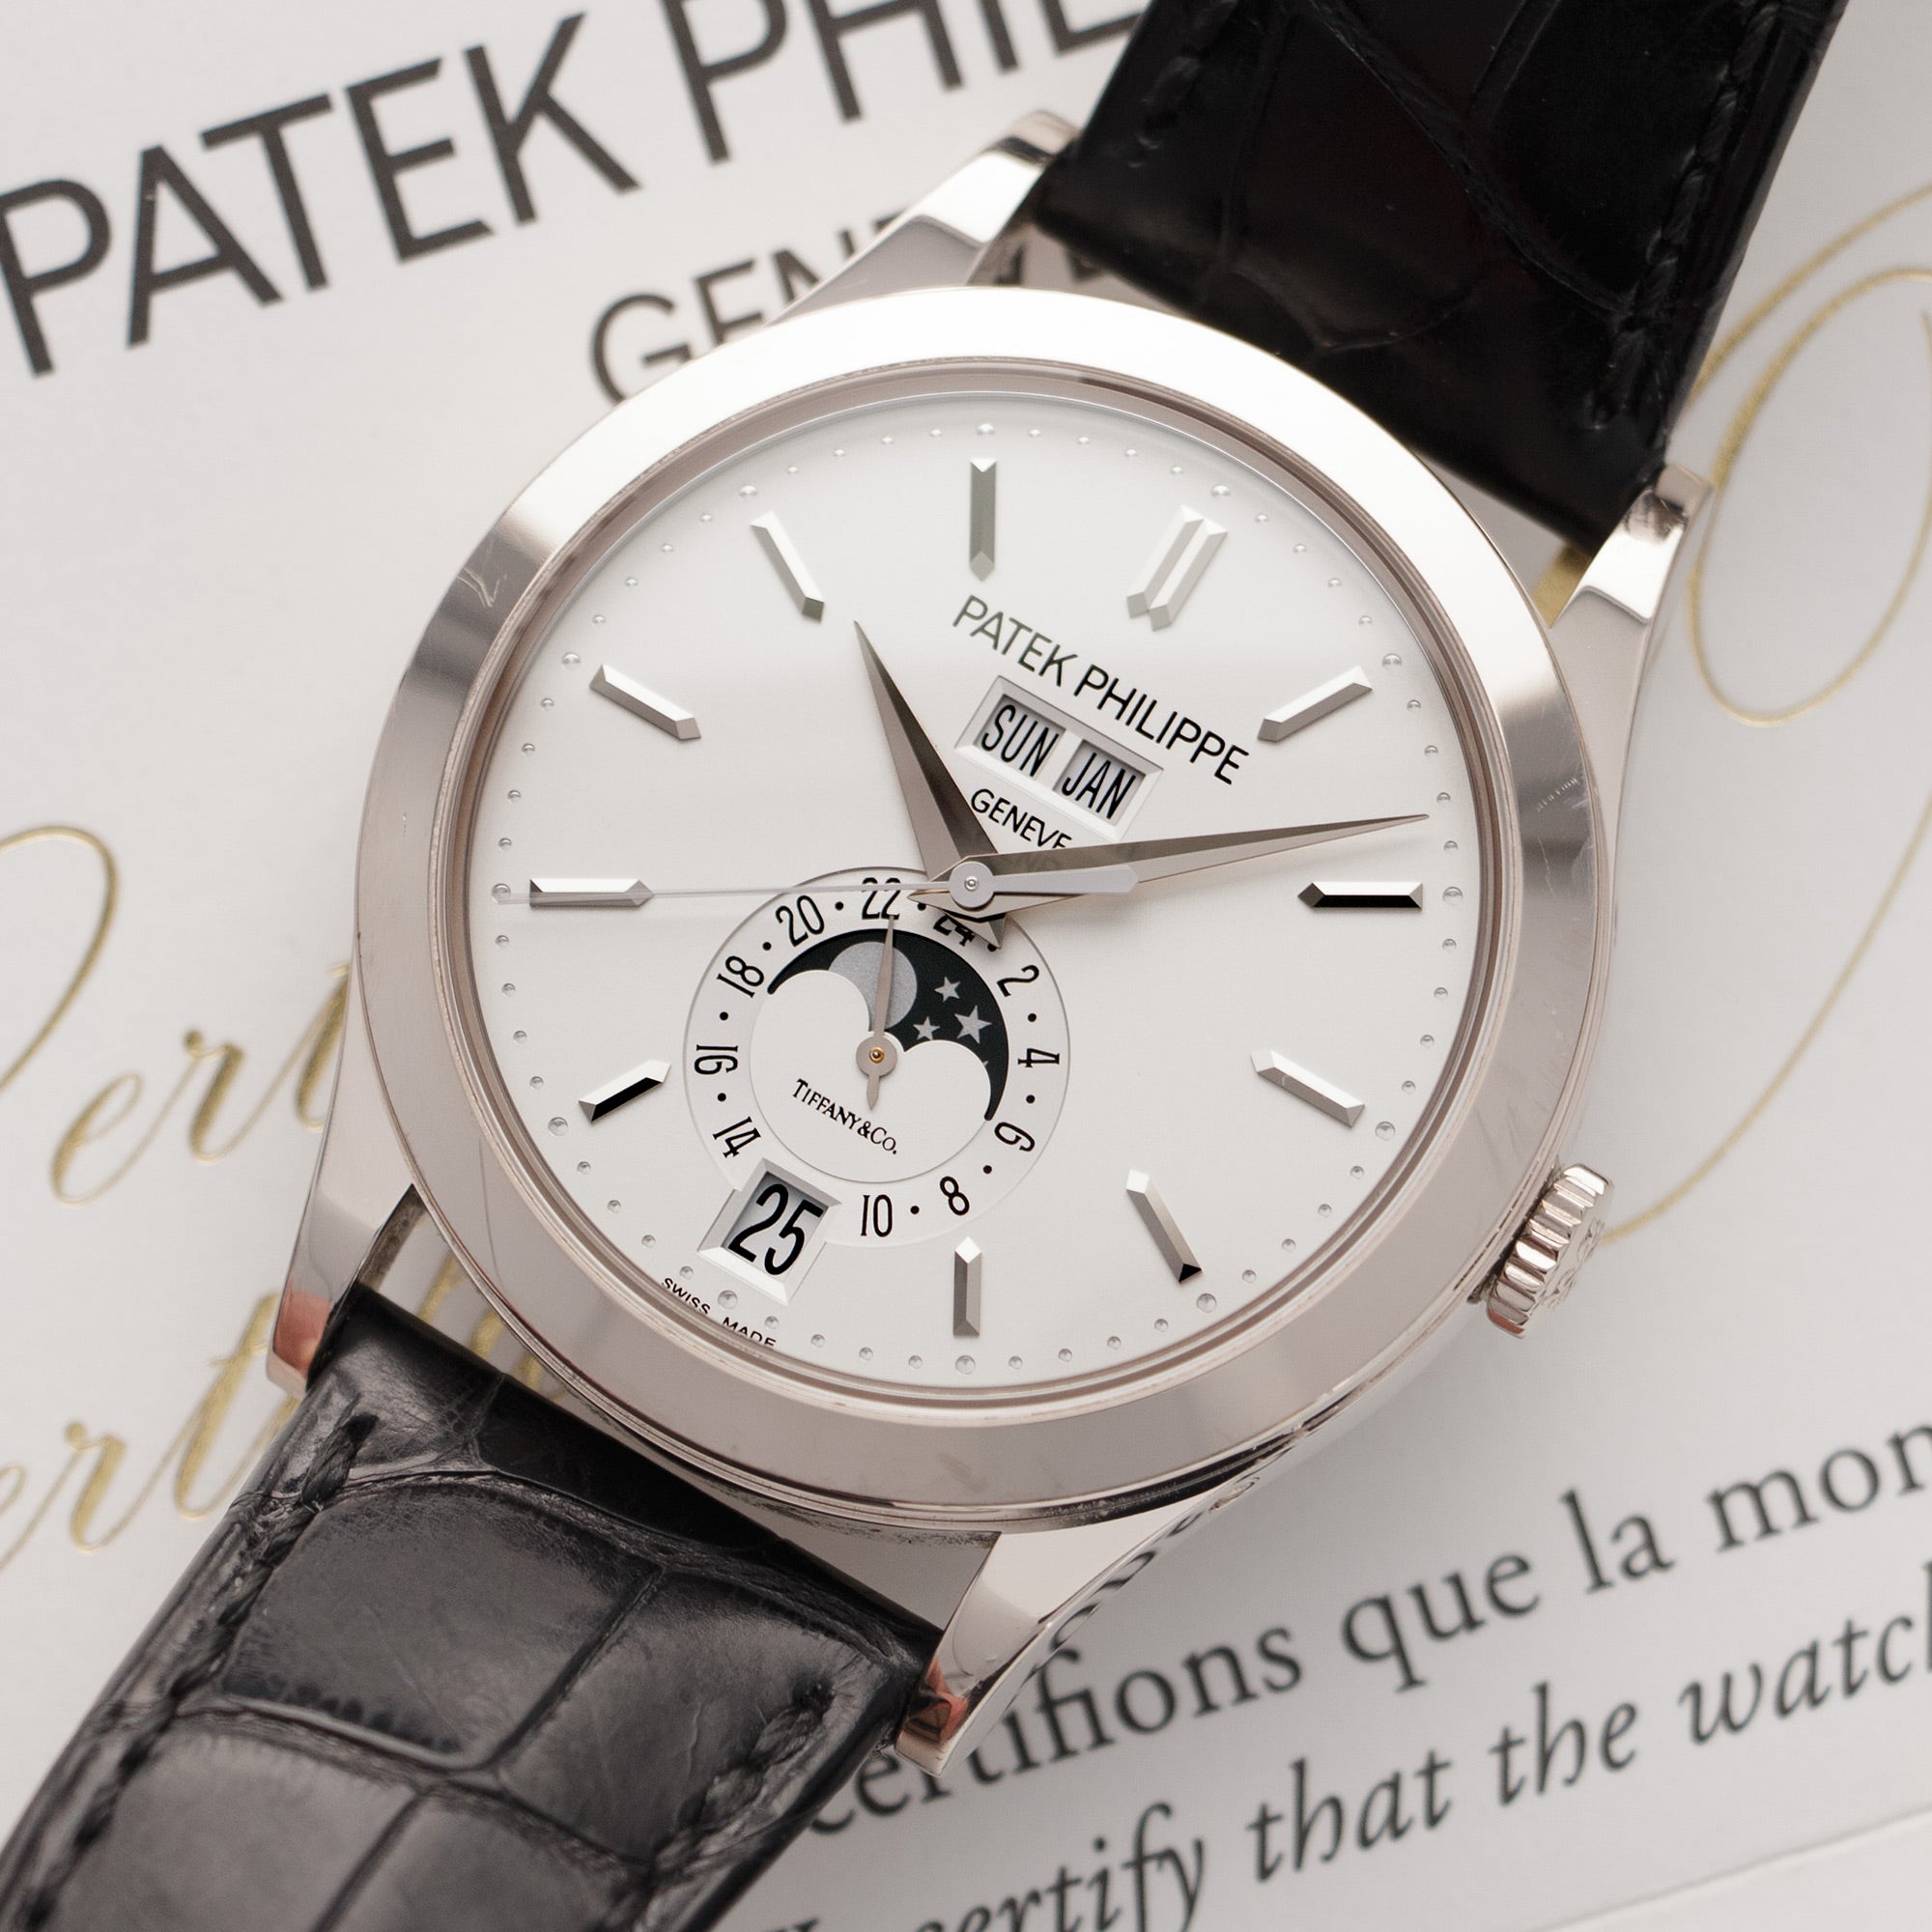 Patek Philippe - Patek Philippe White Gold Annual Calendar Watch, Ref. 5396. Retailed by Tiffany & Co. - The Keystone Watches